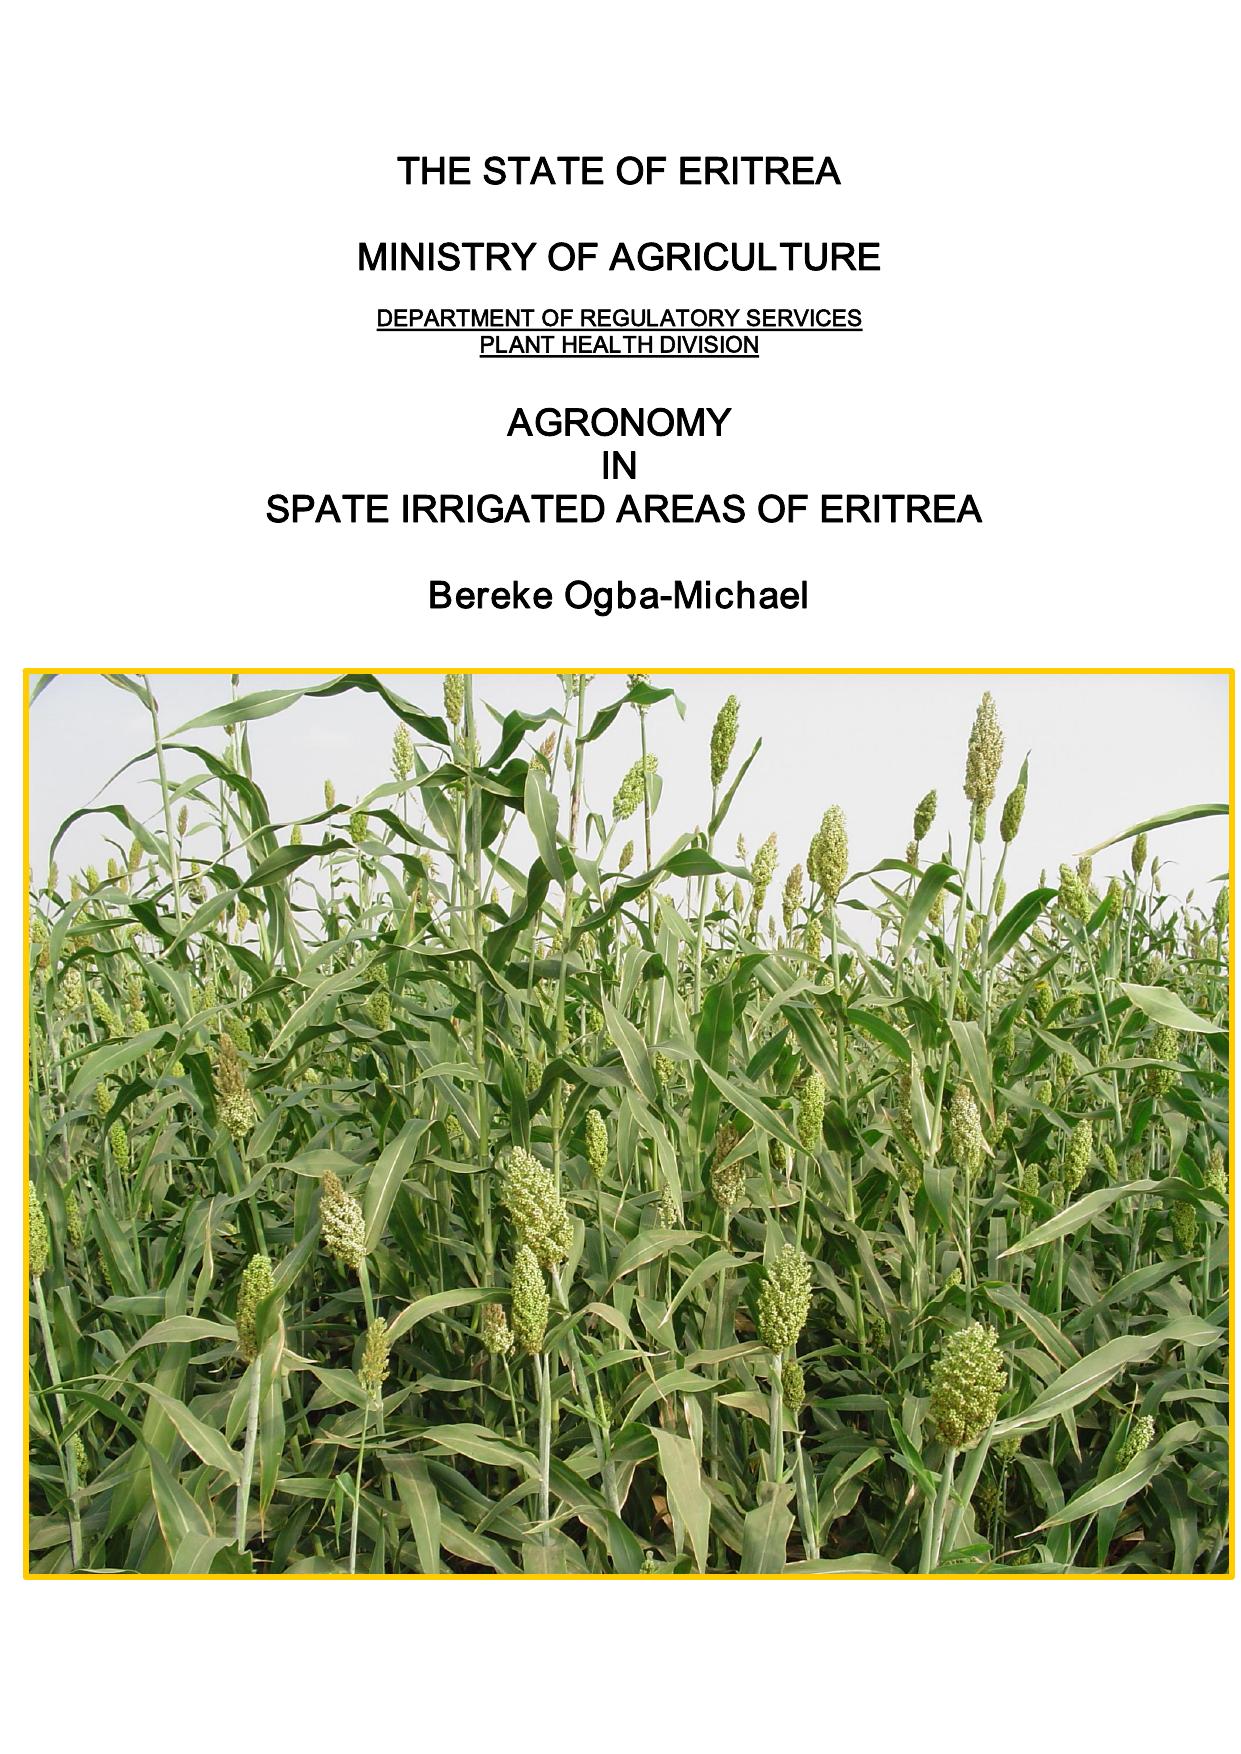 Agronomy in Spate Irrigated Areas of Eritrea2020